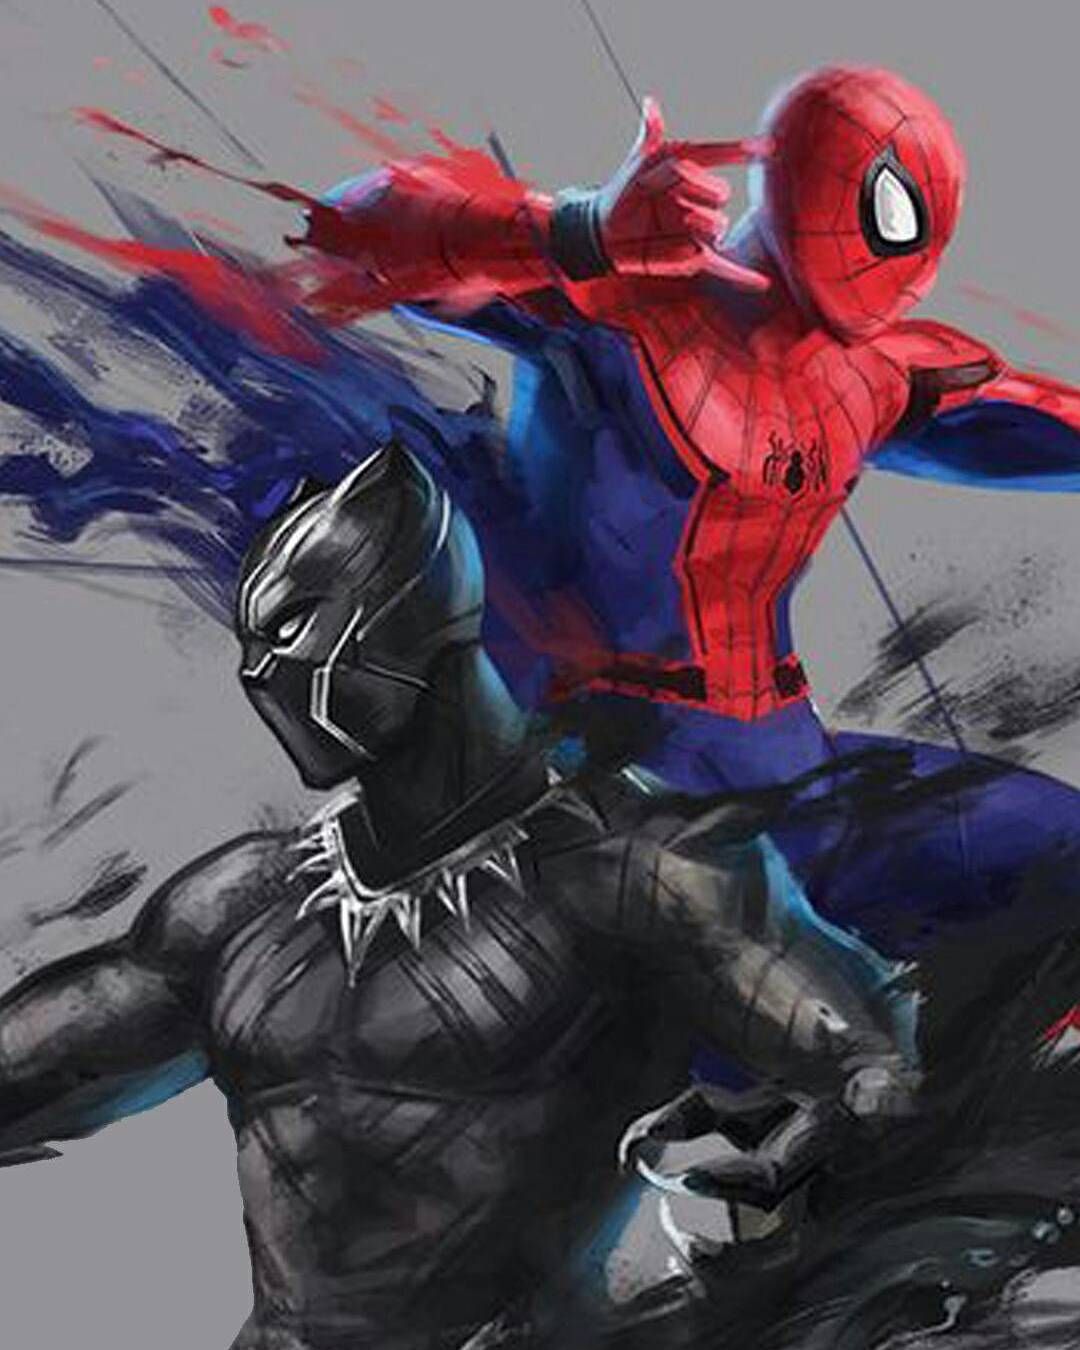 [20+] Spider-Man And Black Panther Wallpapers on WallpaperSafari